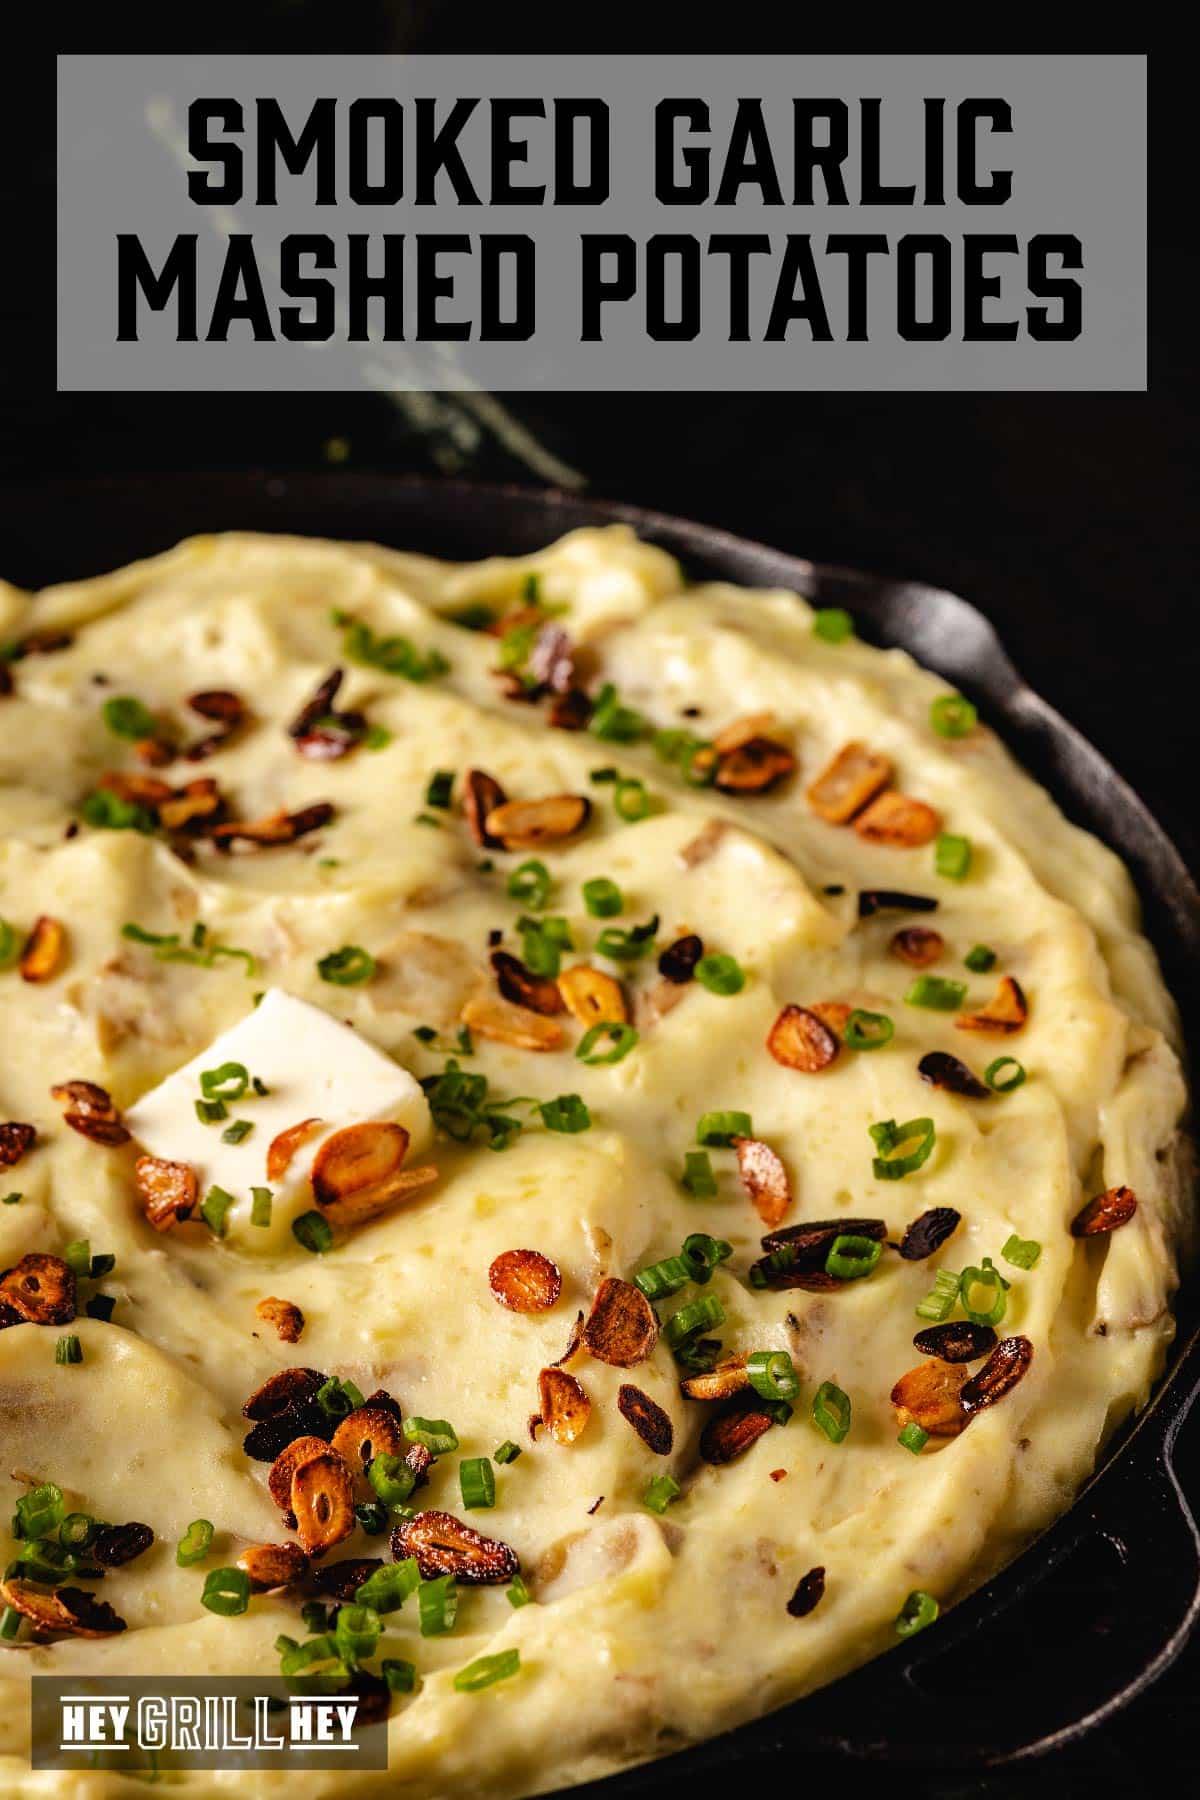 Mashed potatoes in skillet topped with butter and roasted garlic. Text reads "Smoked Garlic Mashed Potatoes".